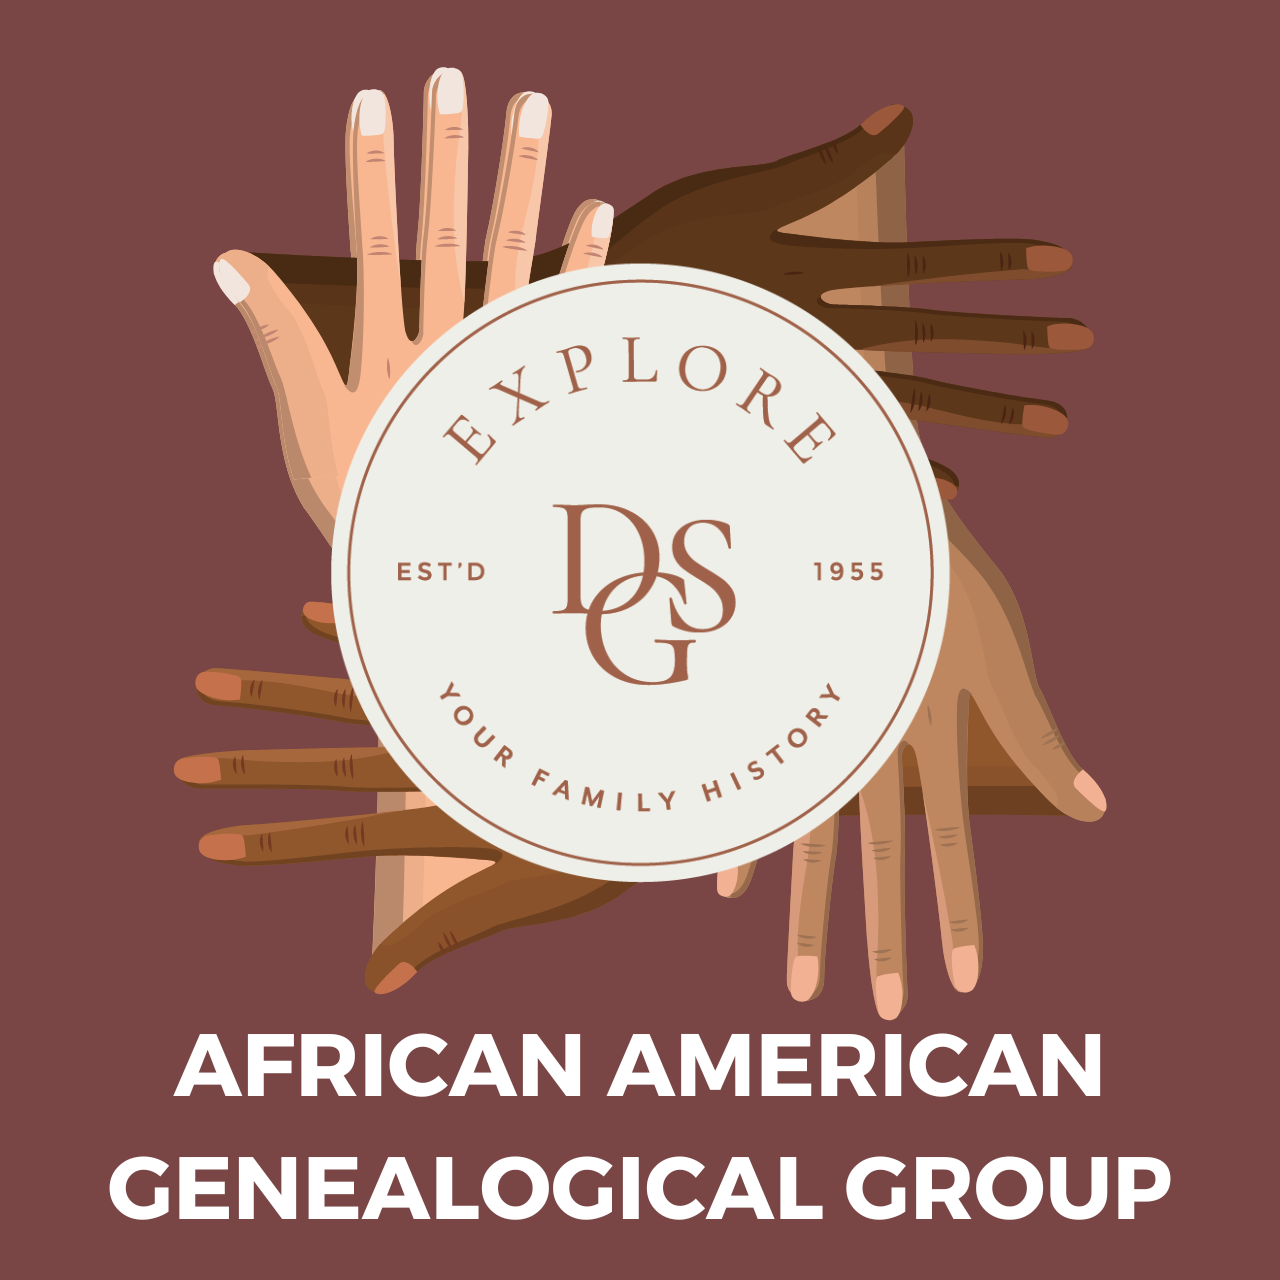 Hands of various colors and Dallas Genealogical Society logo